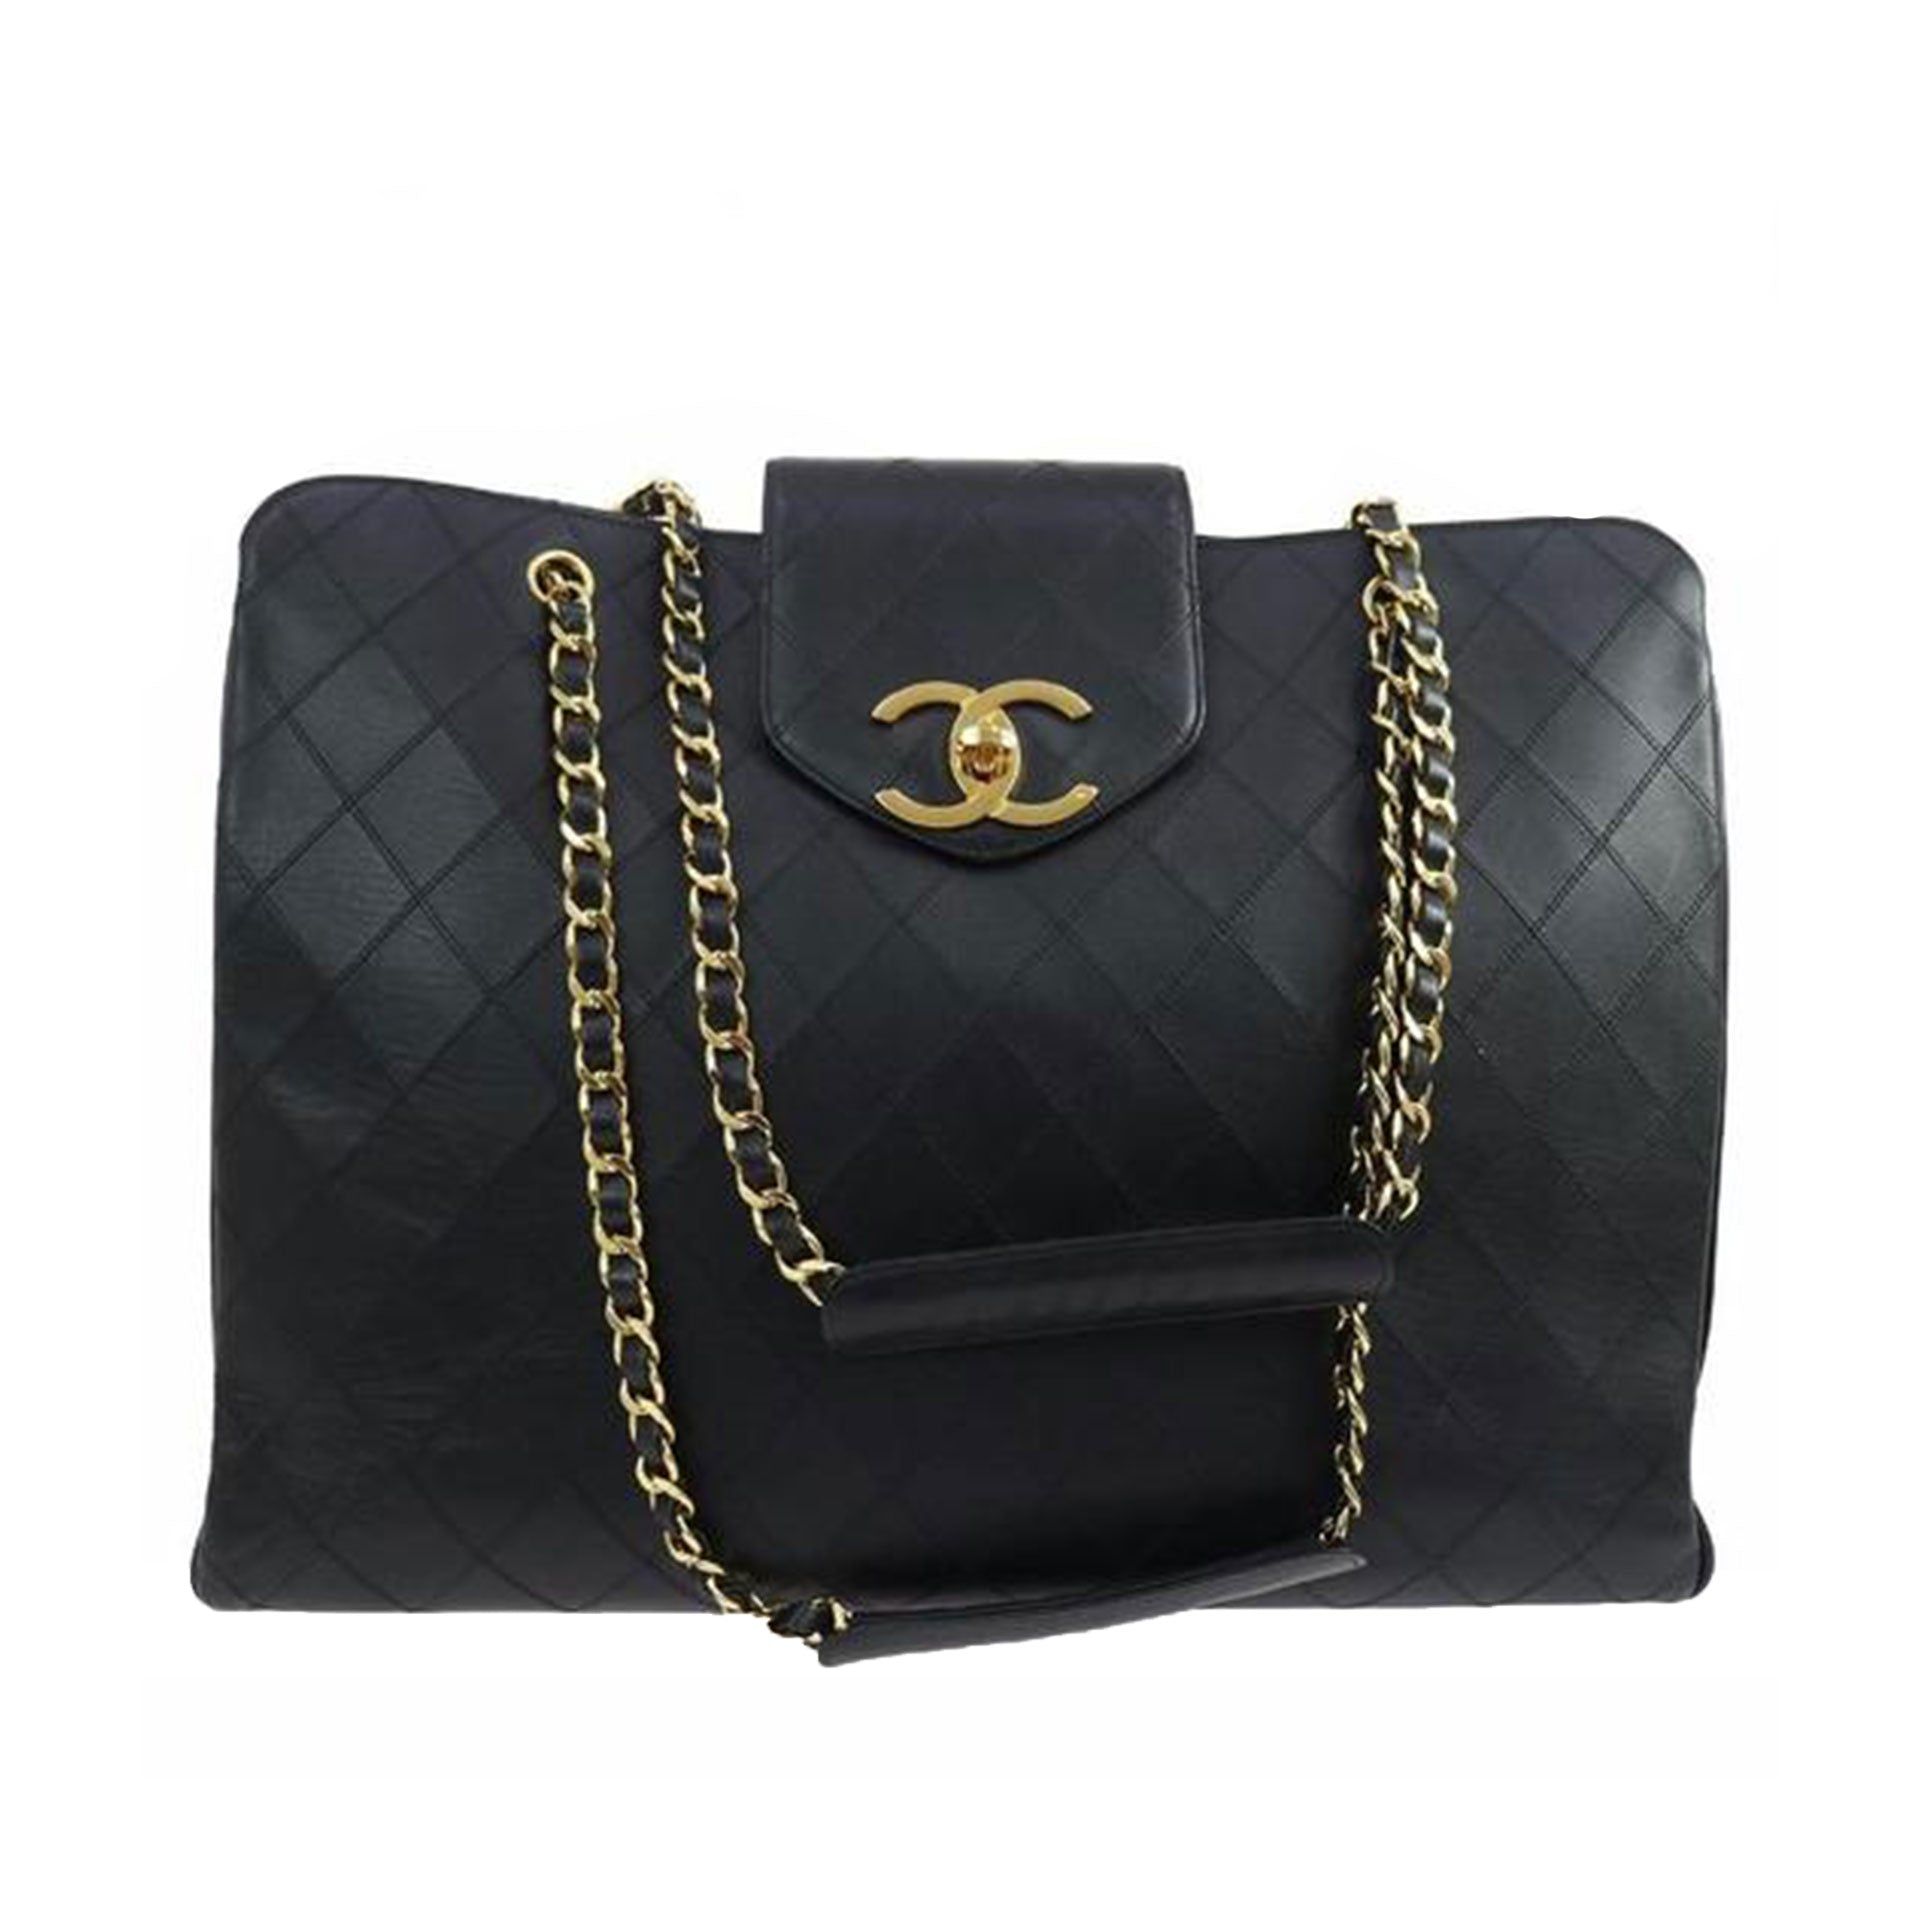 Chanel Vintage Quilted Lambskin Leather Shopper Bag